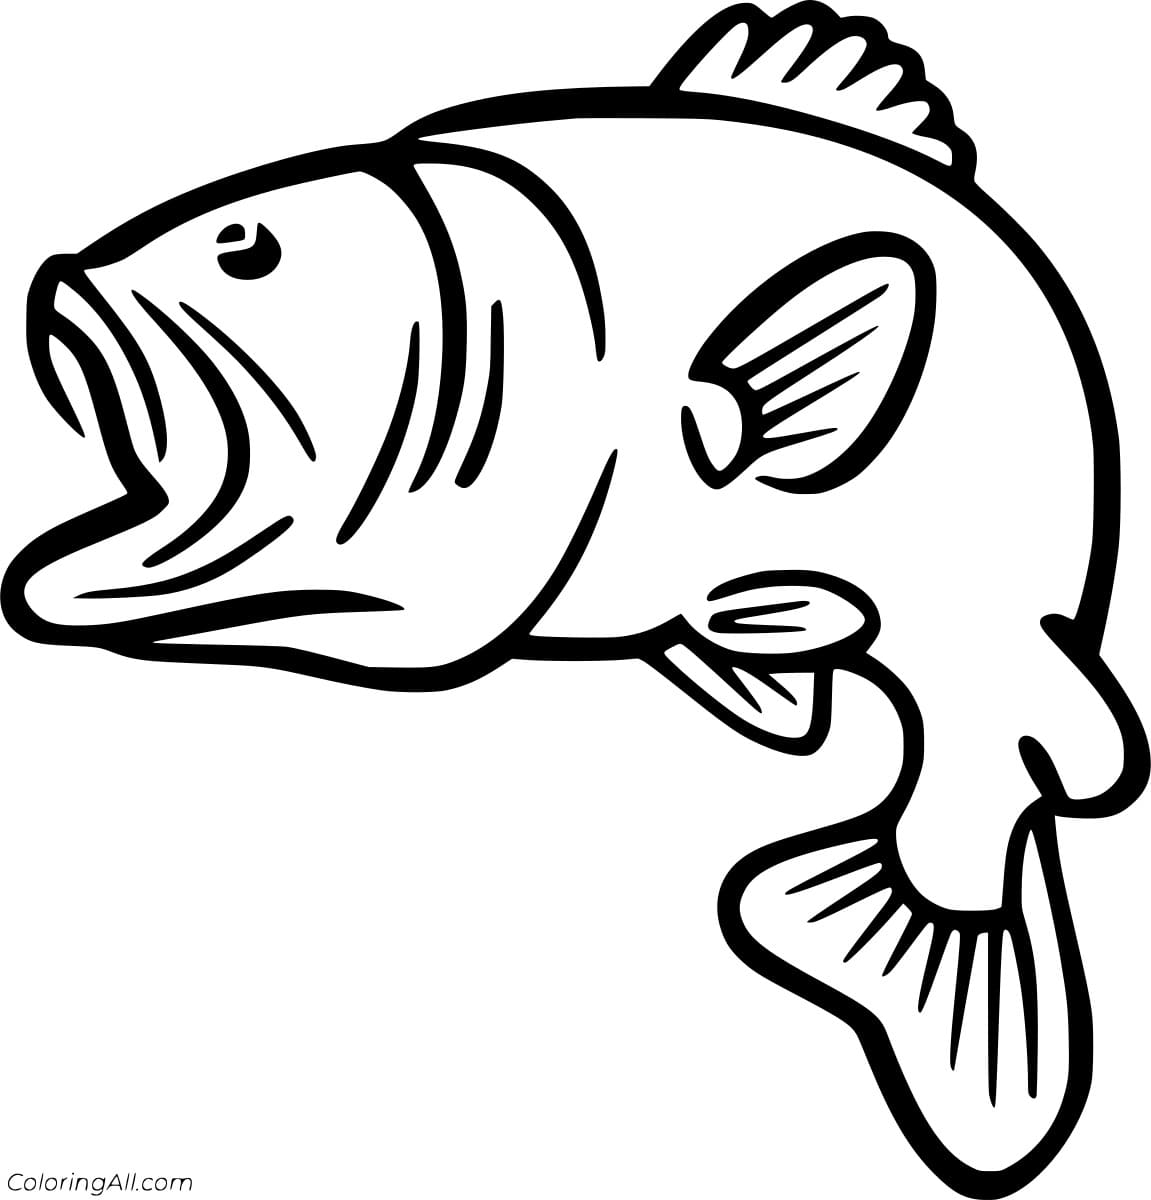 Spotted Bass Image Coloring Page